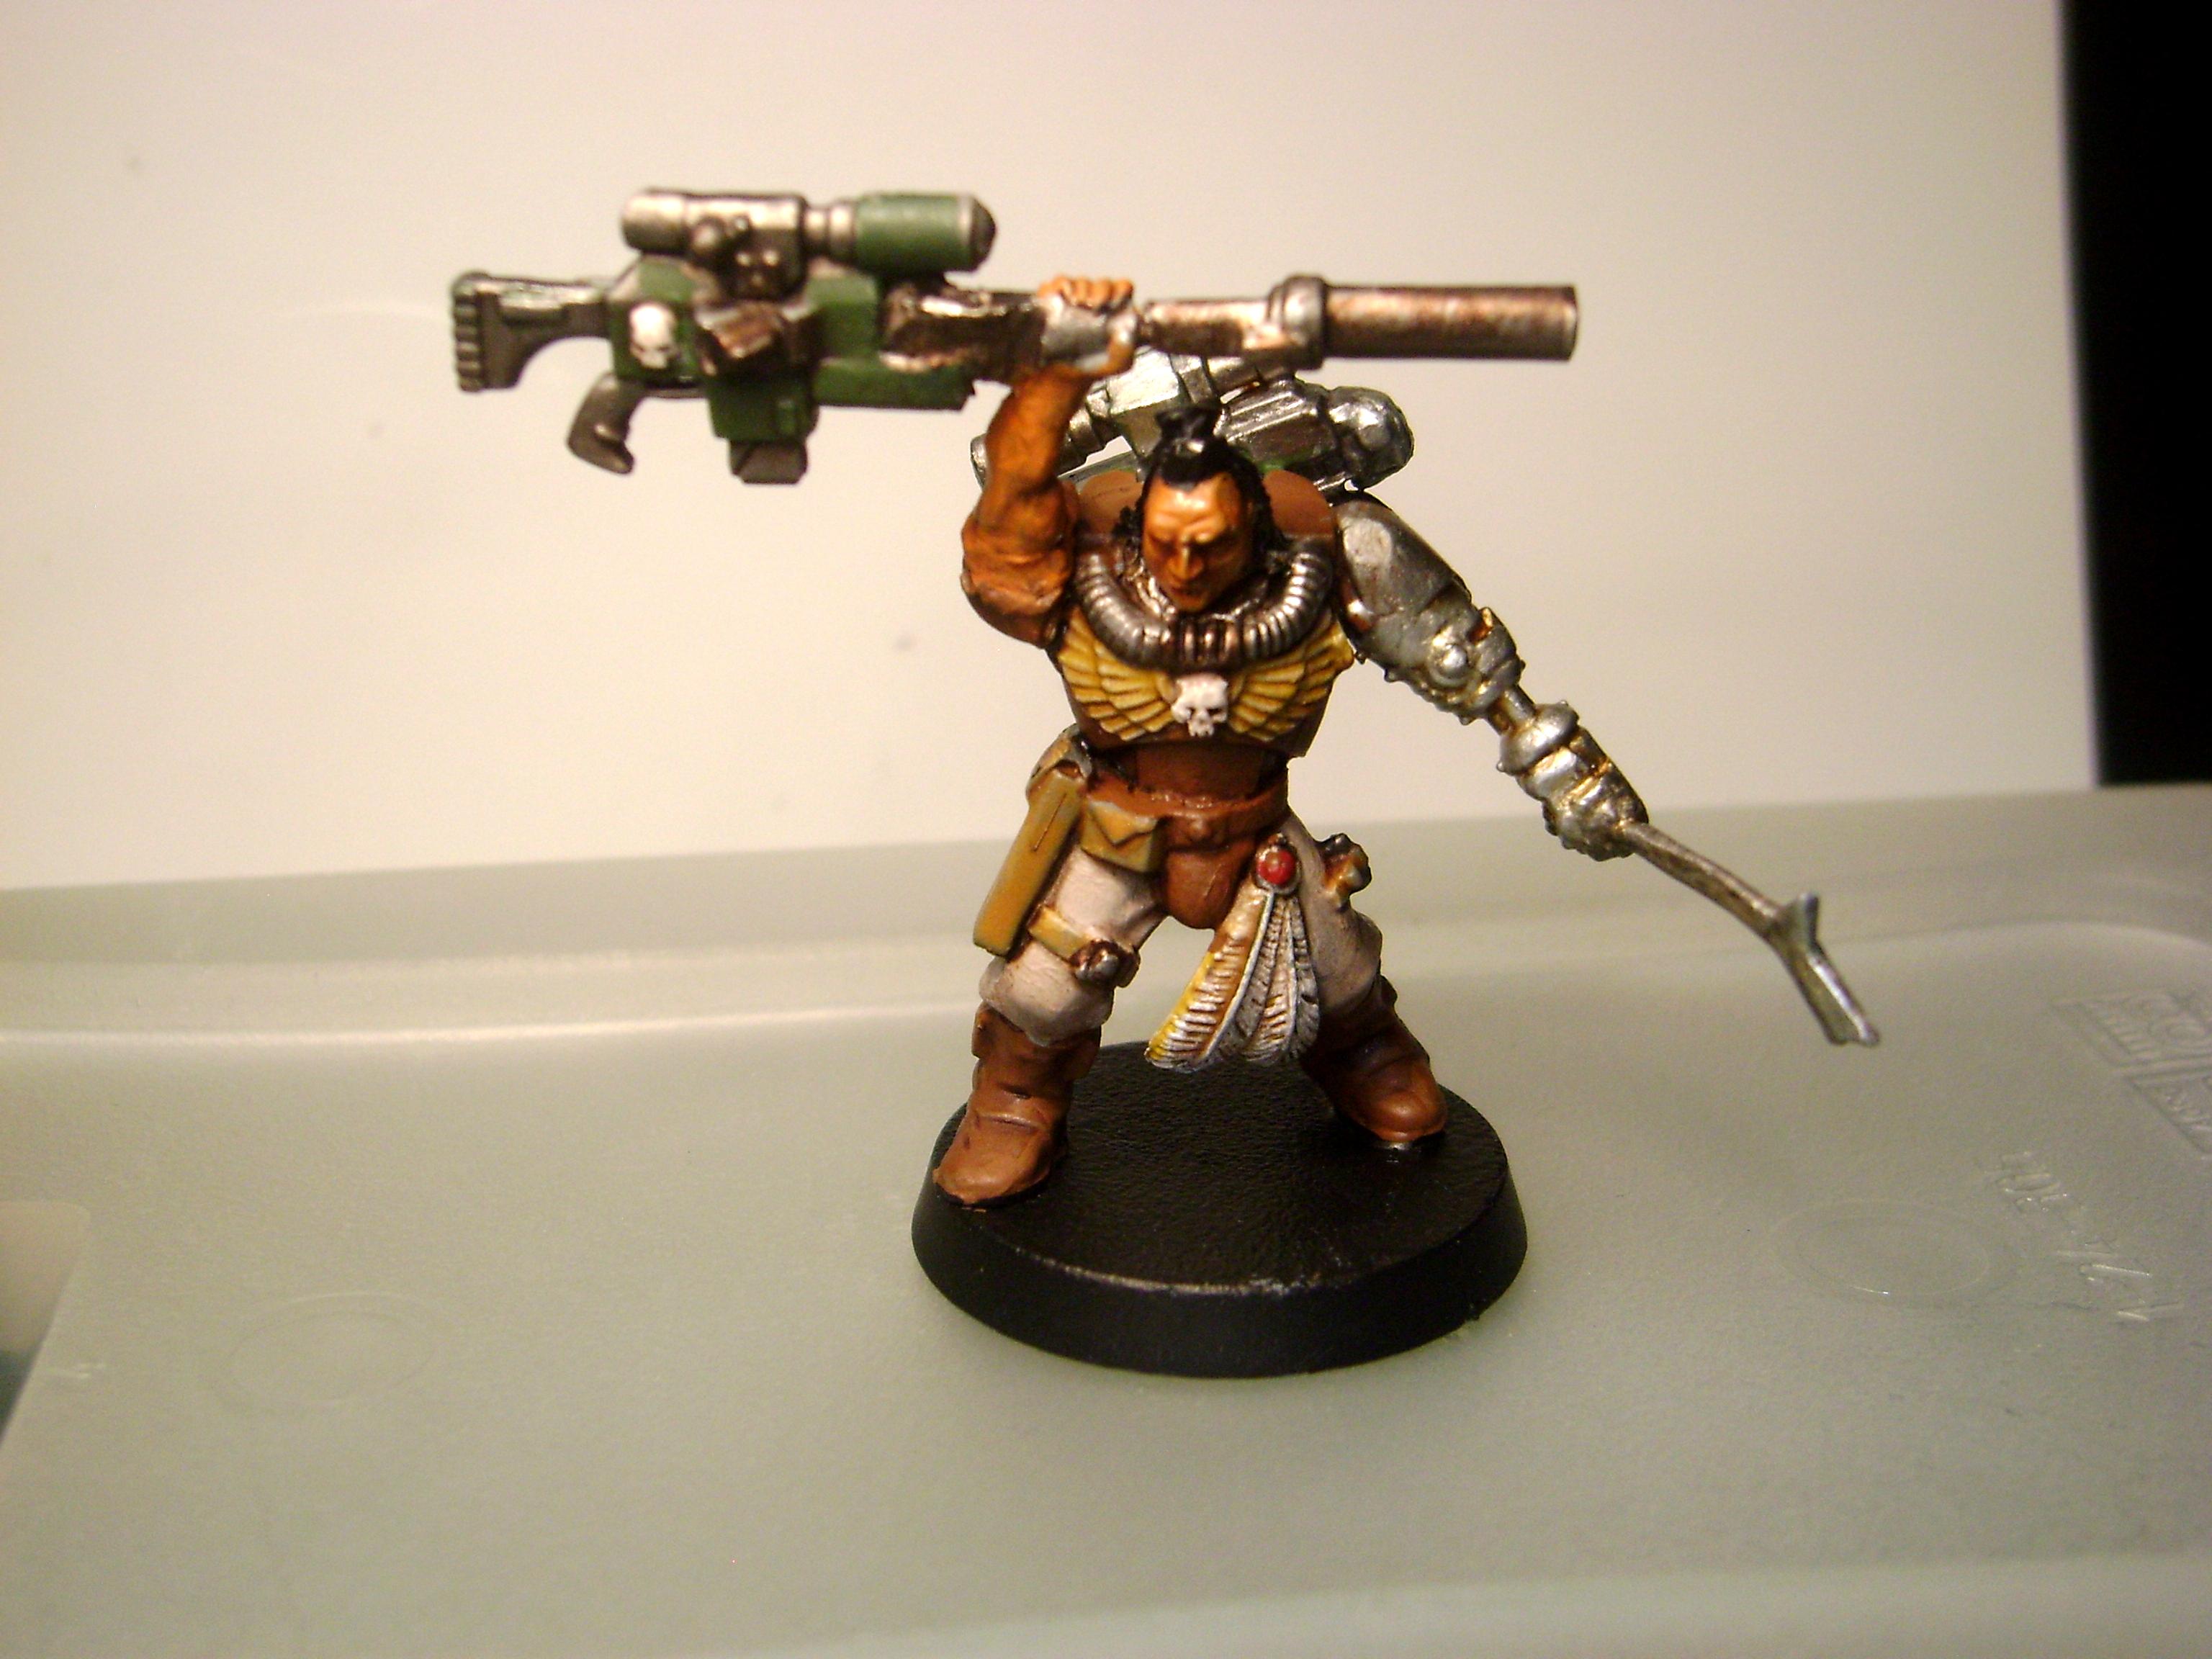 Snipers, Space Marines